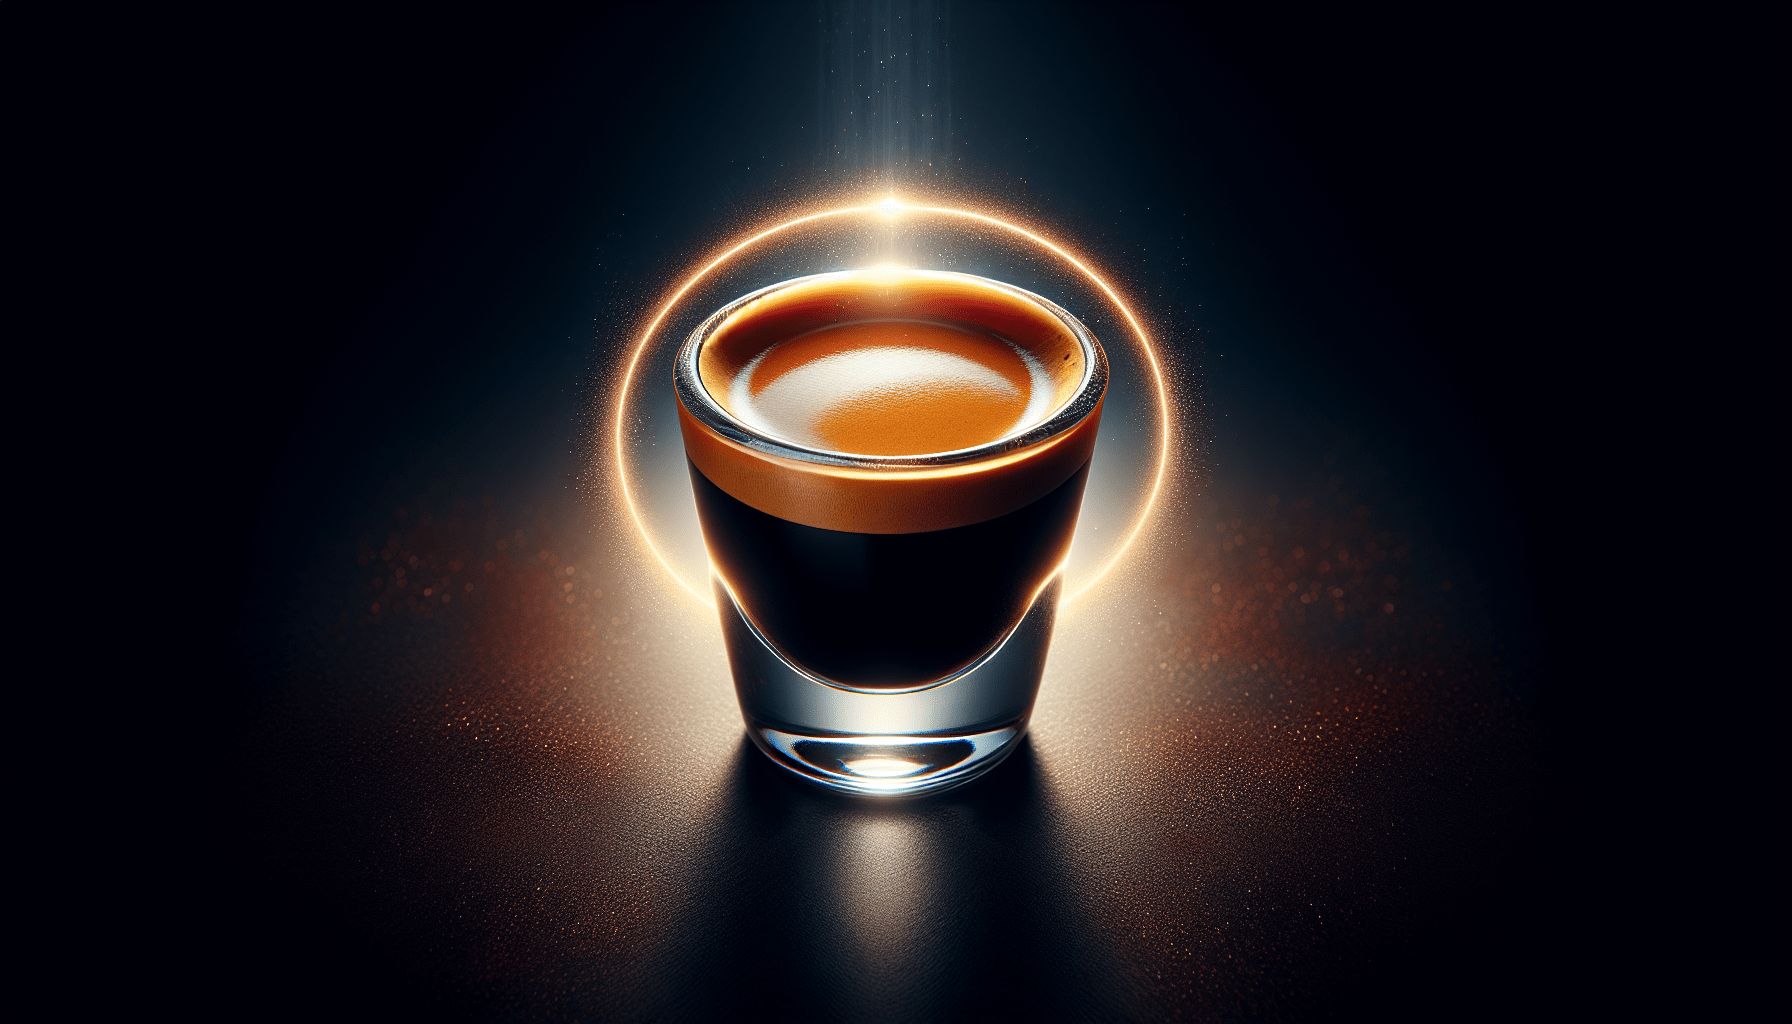 How Much Is A Shot Of Espresso Caffeine?